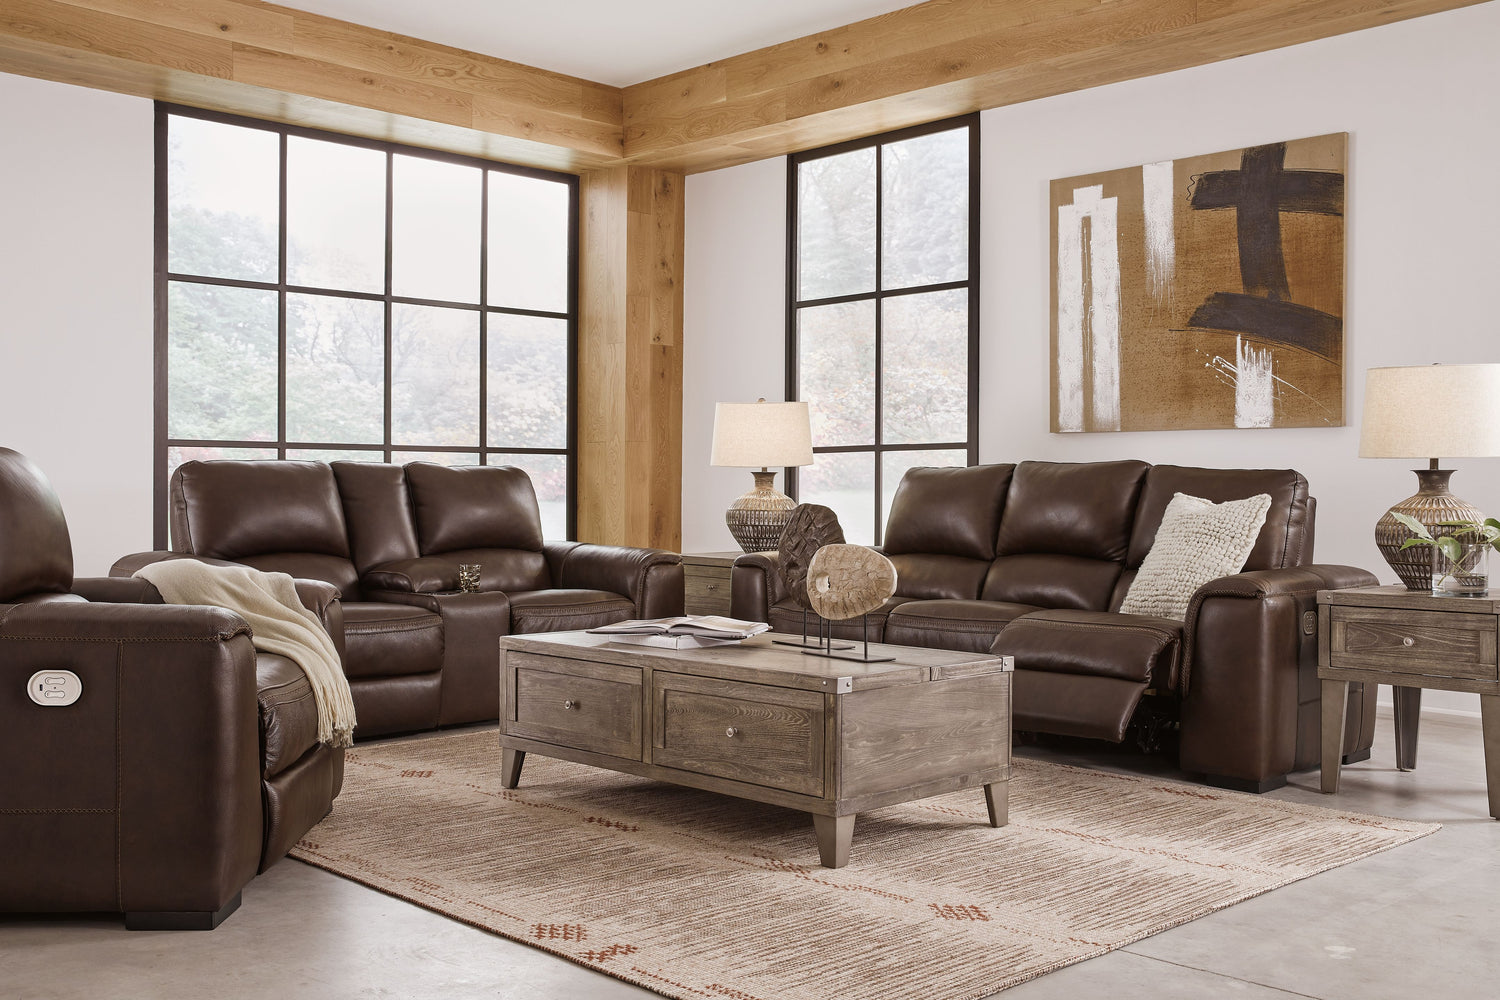 “Discover Quality and Affordable Furniture at Sacramento Furniture Store”